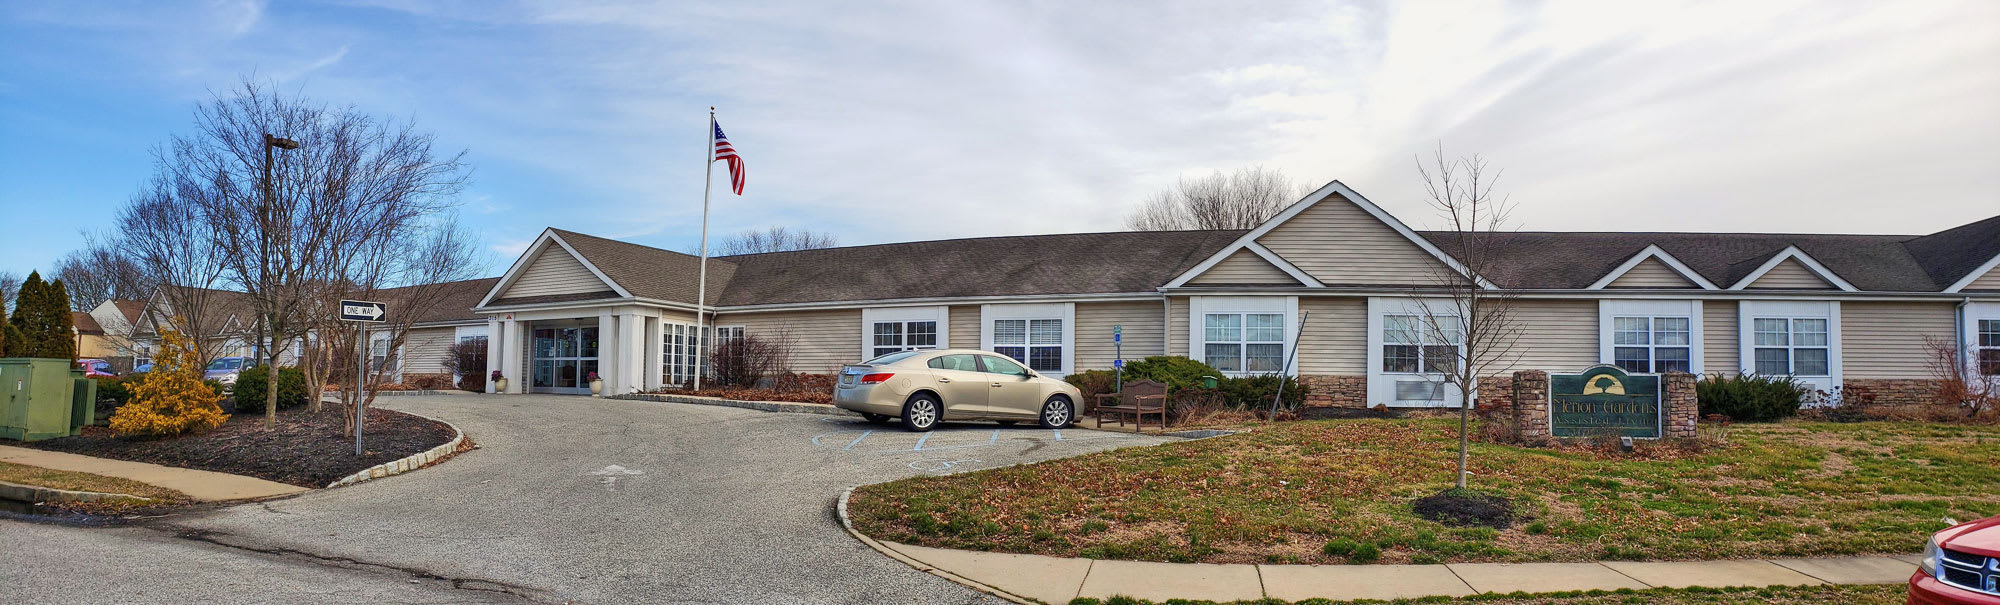 Photo of Merion Gardens Assisted Living